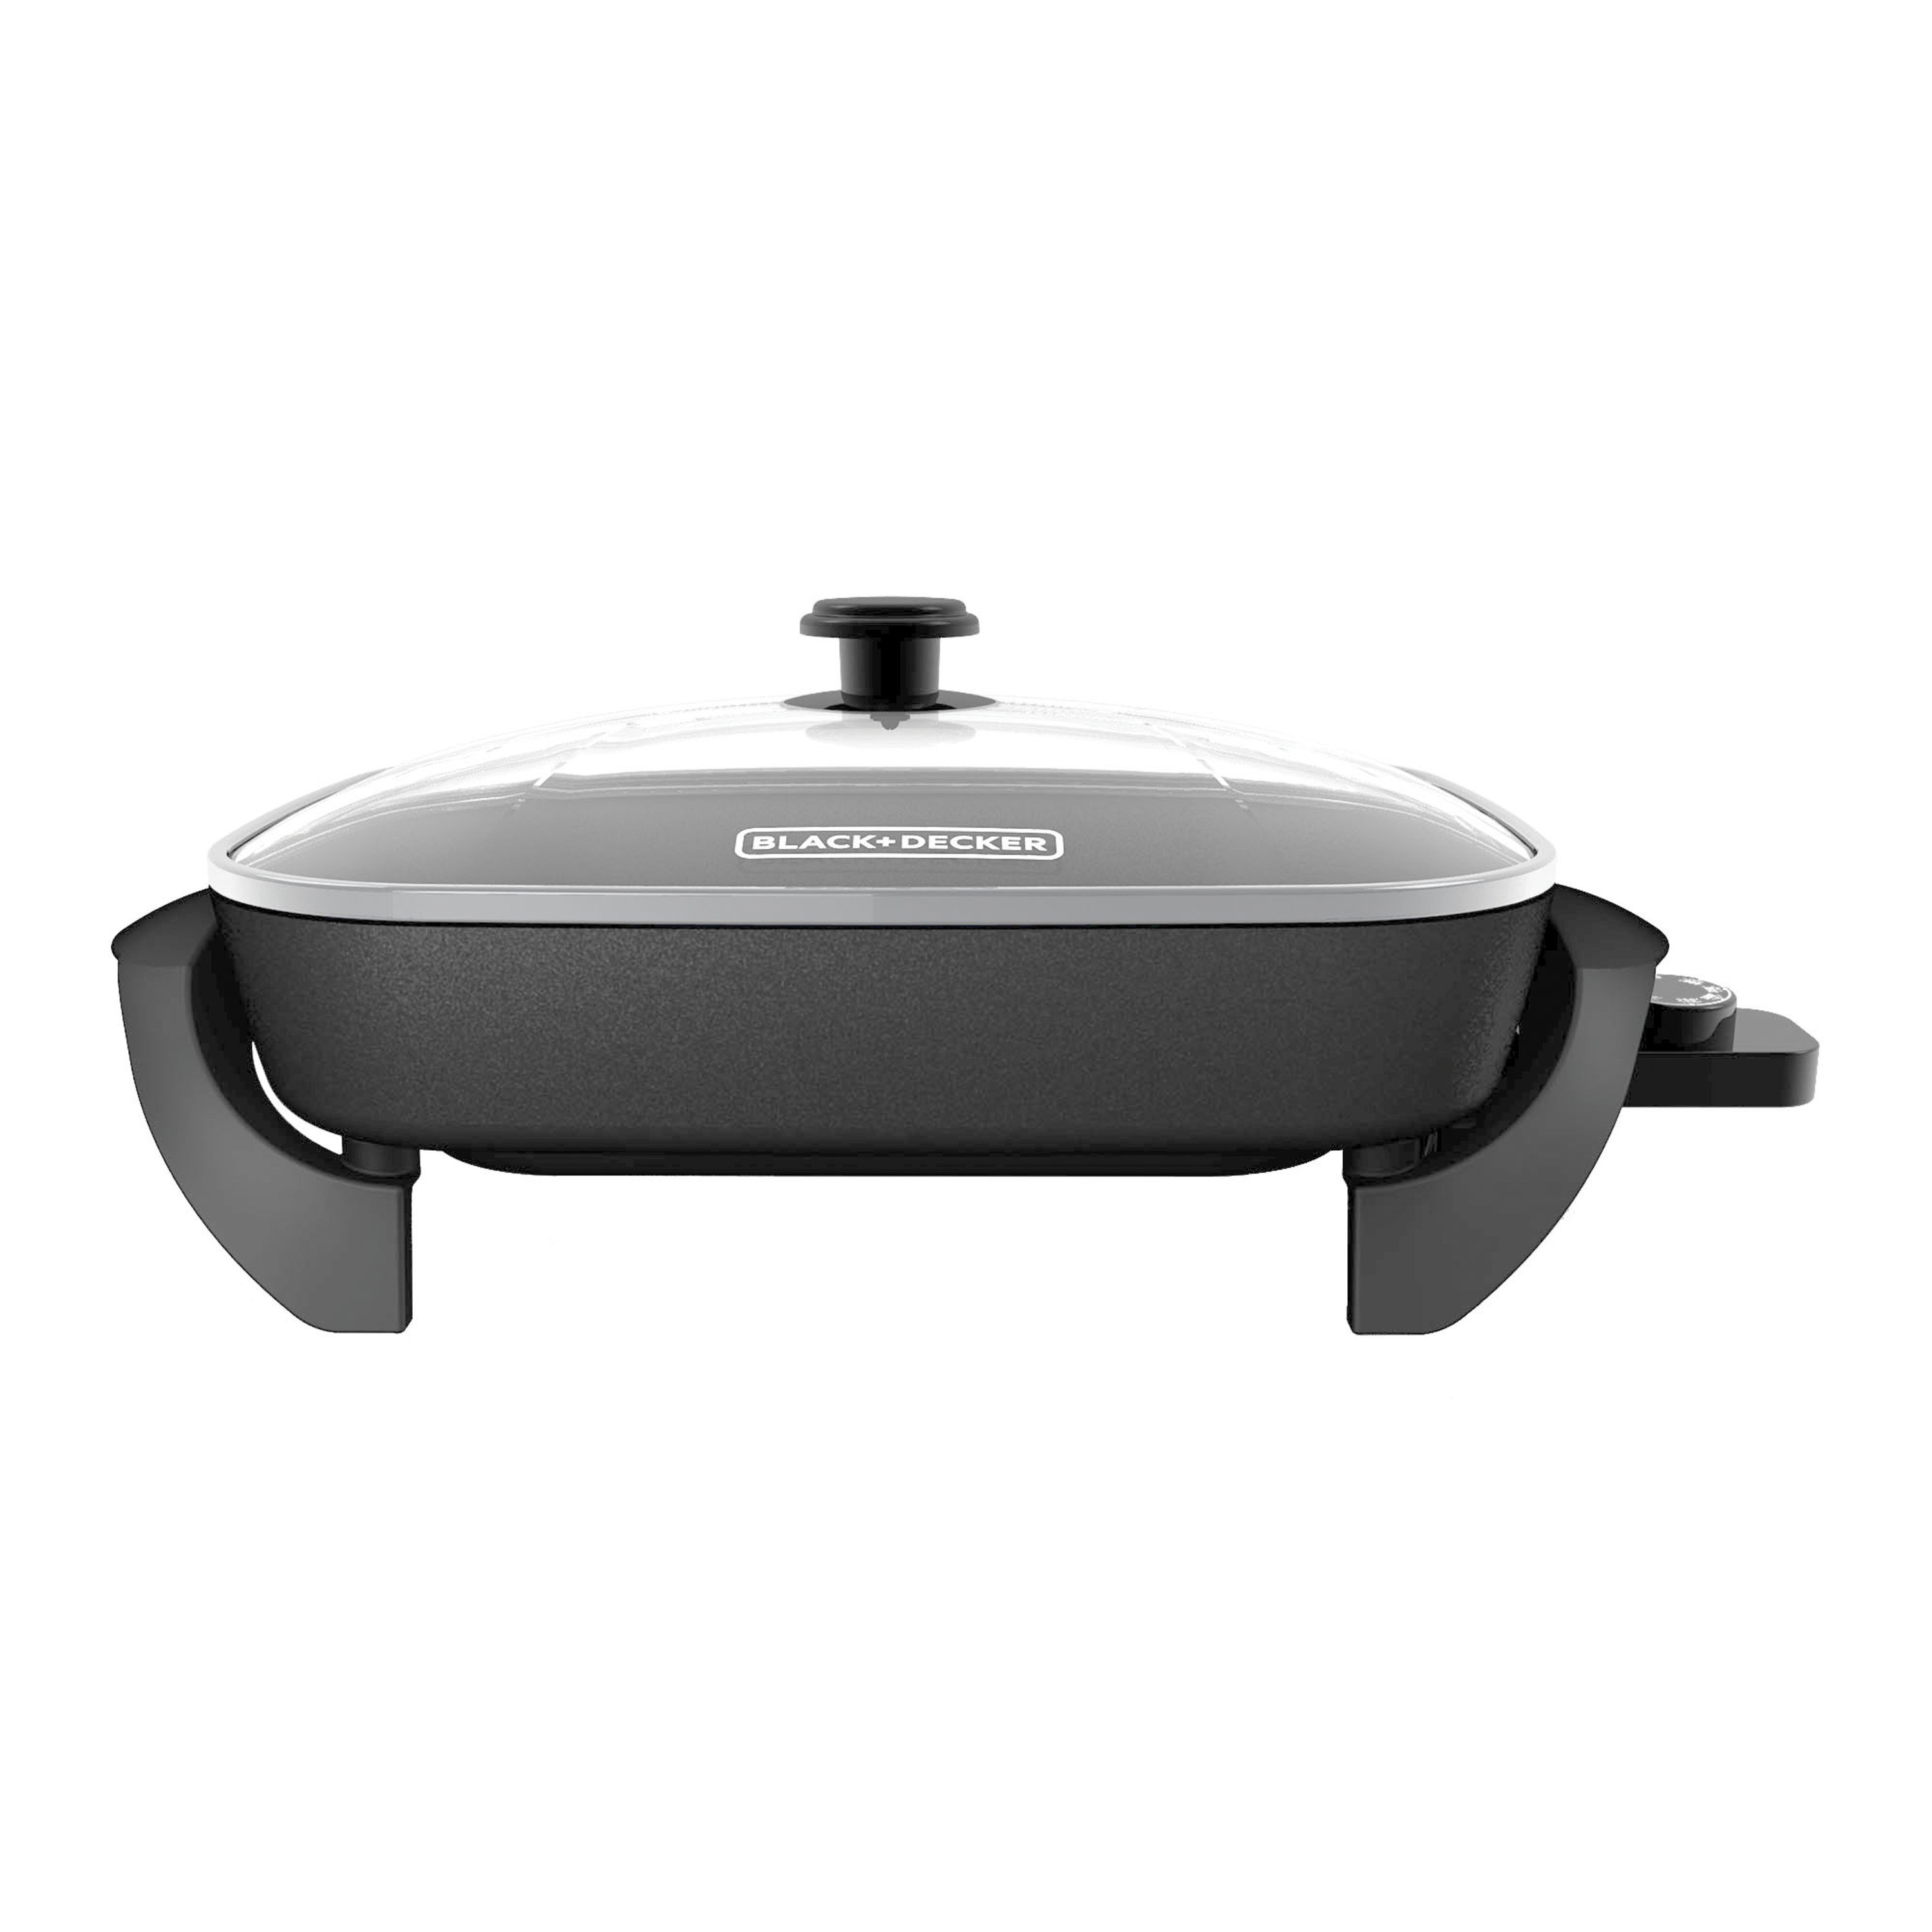 Black & Decker 12 Inch Electric Skillet with Glass Lid. A